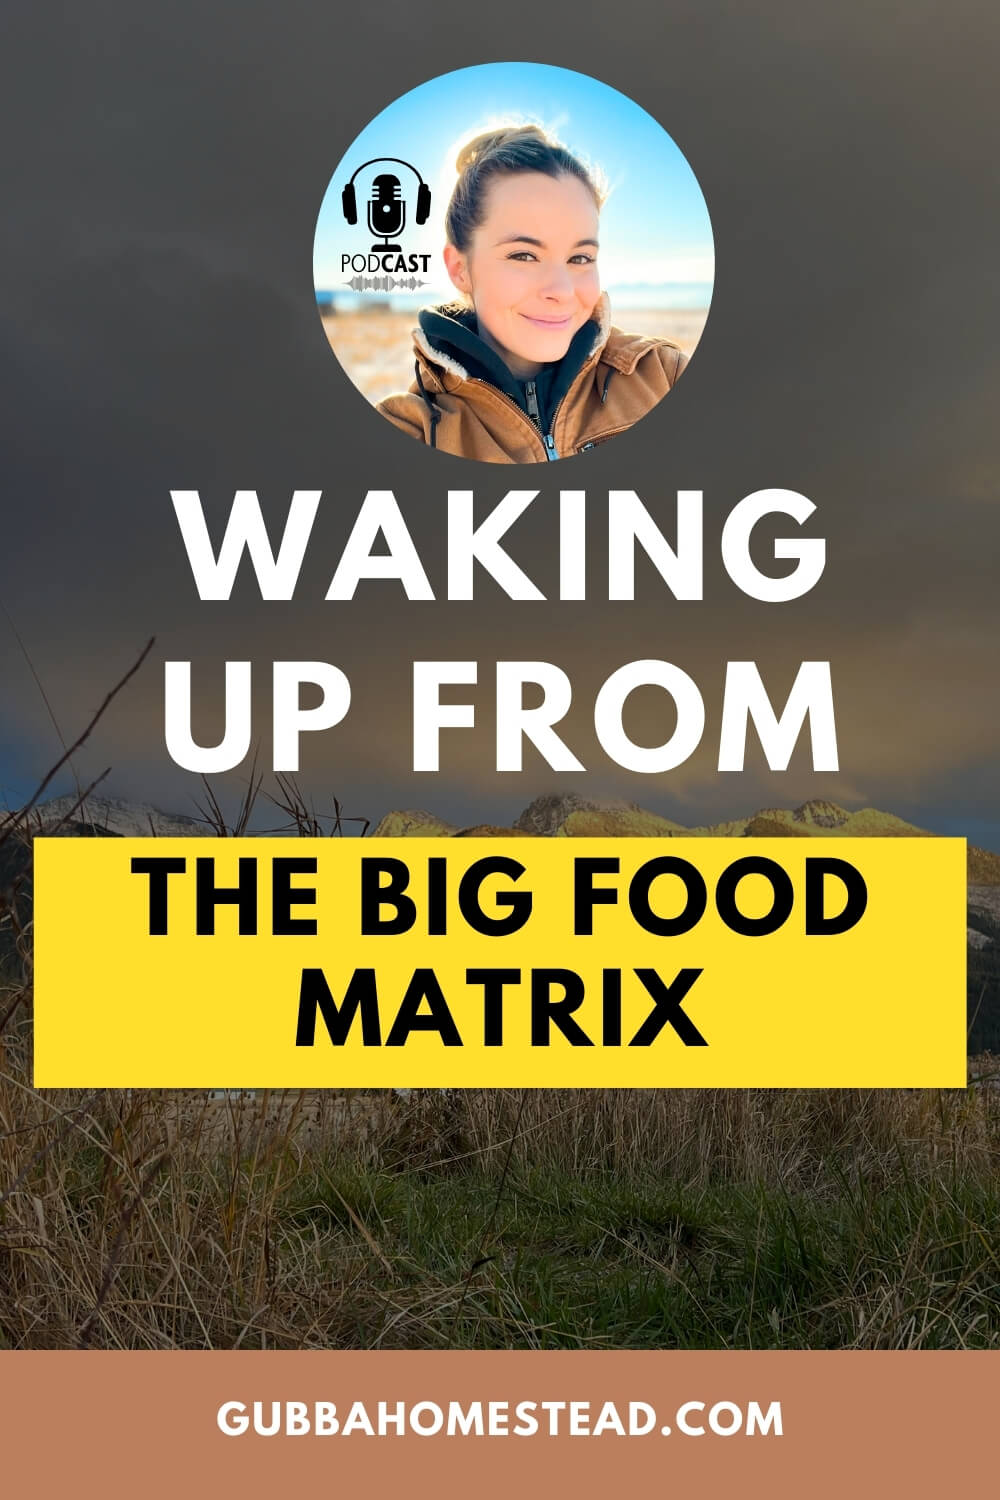 Waking up from the Big Food Matrix